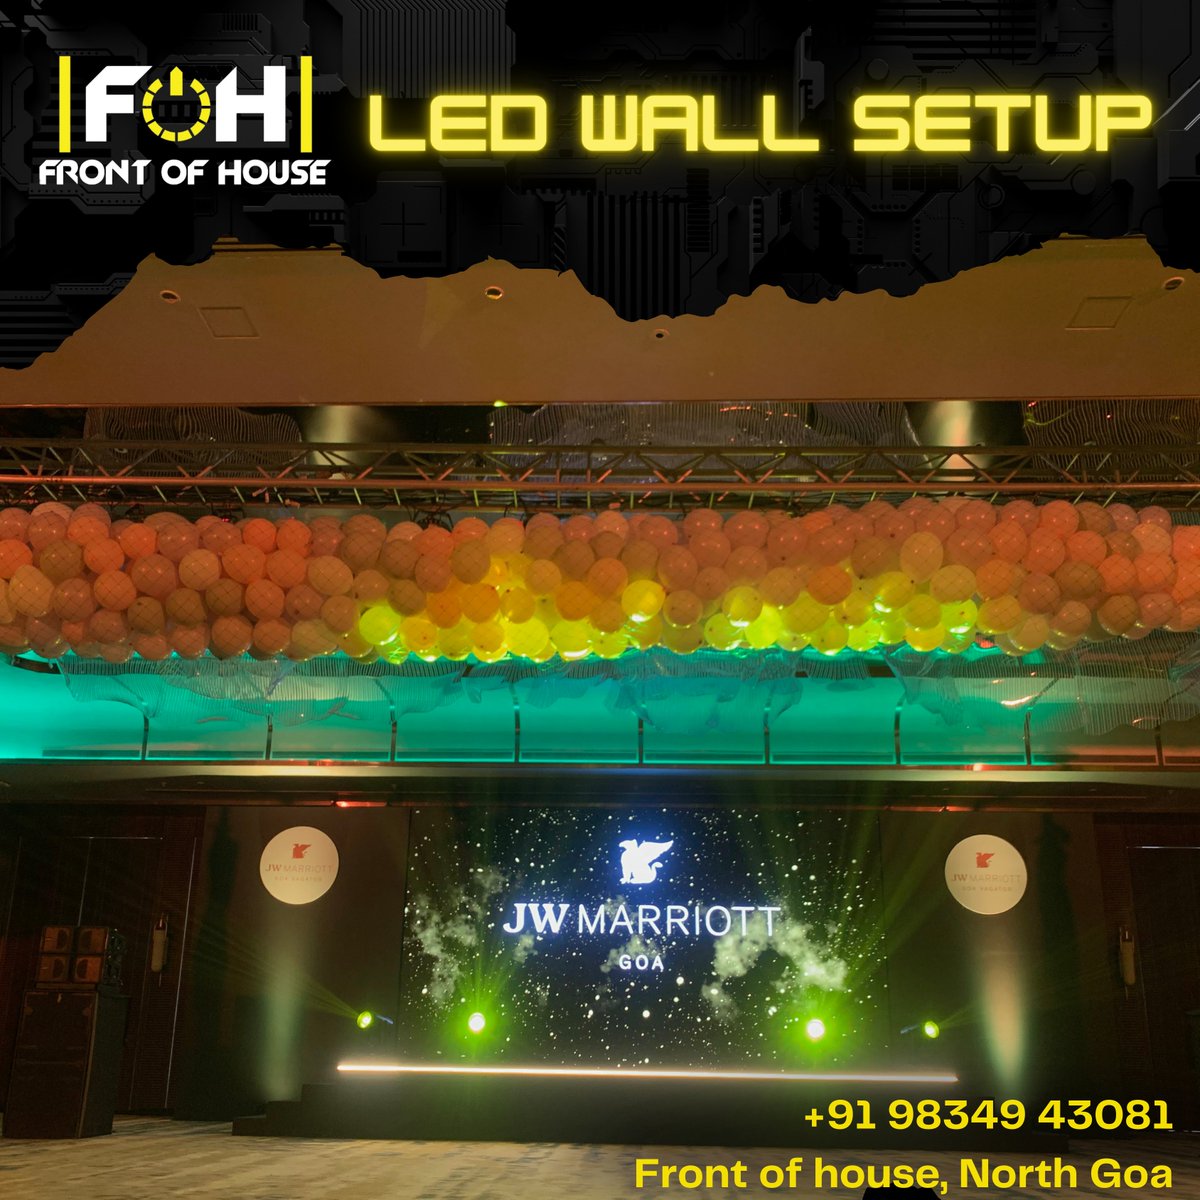 From stunning graphics and animations to live video feeds and interactive content, our LED walls will bring your vision to life in vibrant color and clarity.

📍Location: maps.app.goo.gl/oe93xGRgBEi14F… 

#LightUpYourEvent #UnforgettableExperience #ScreenSetup #EventTech #LEDSetup